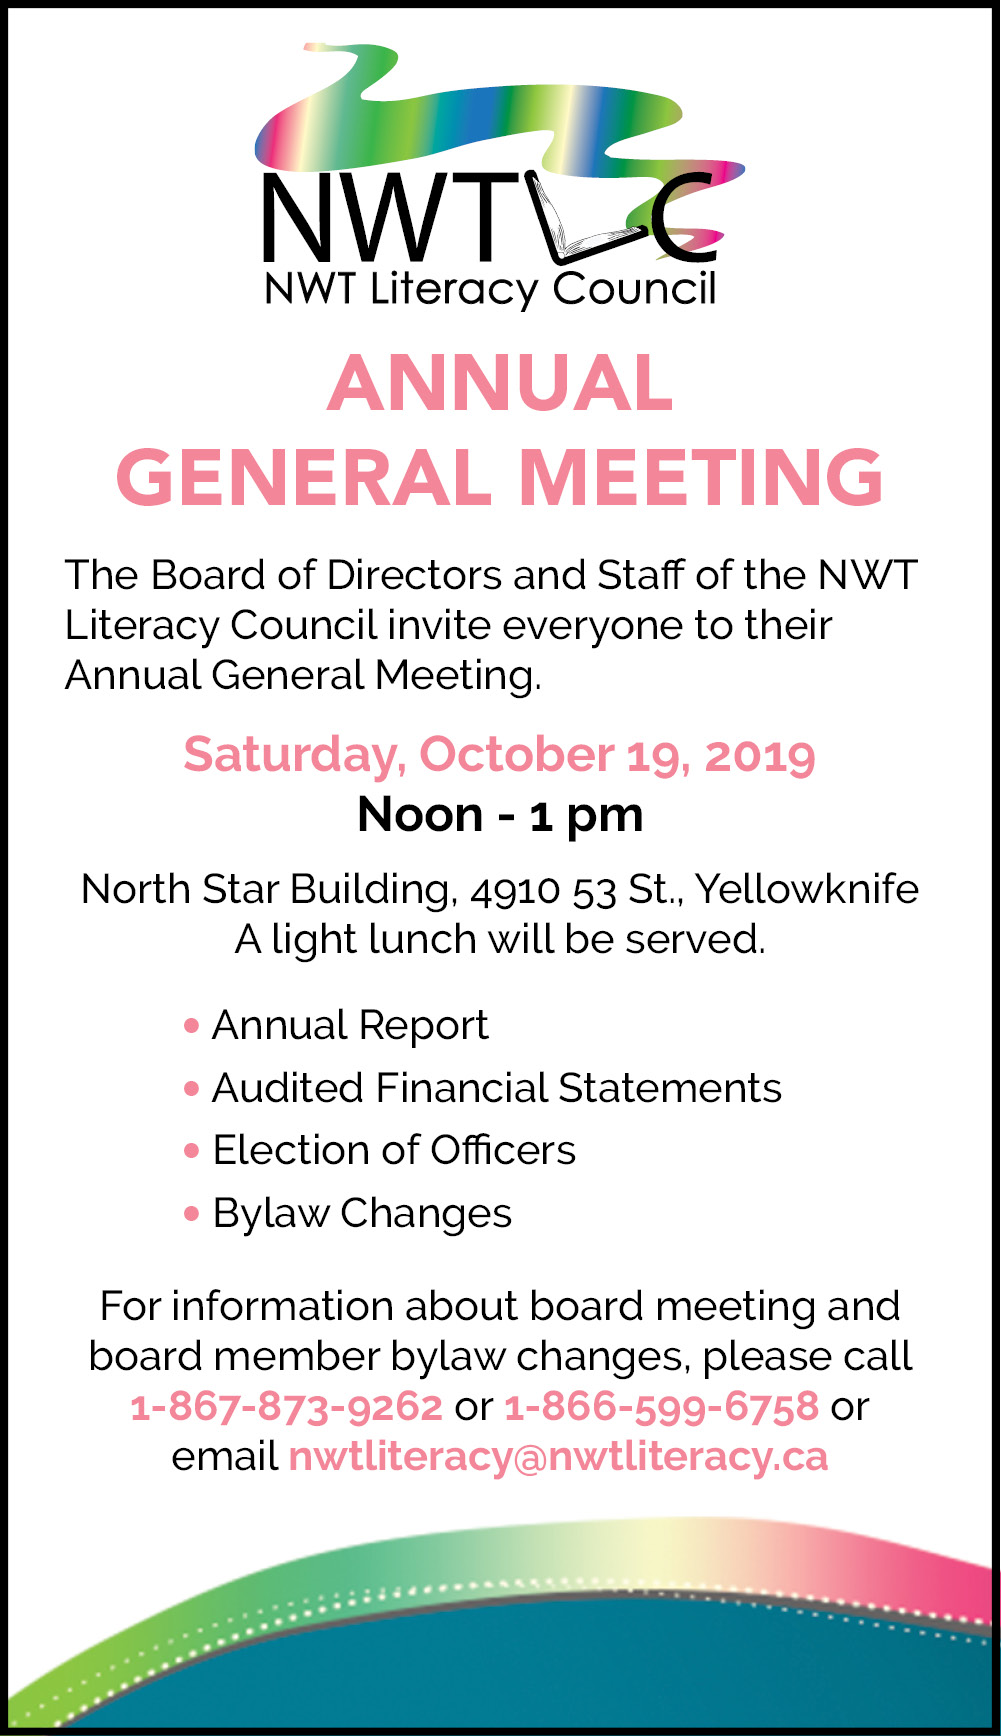 Our AGM is Saturday, October 19, 2019. Everyone welcome.